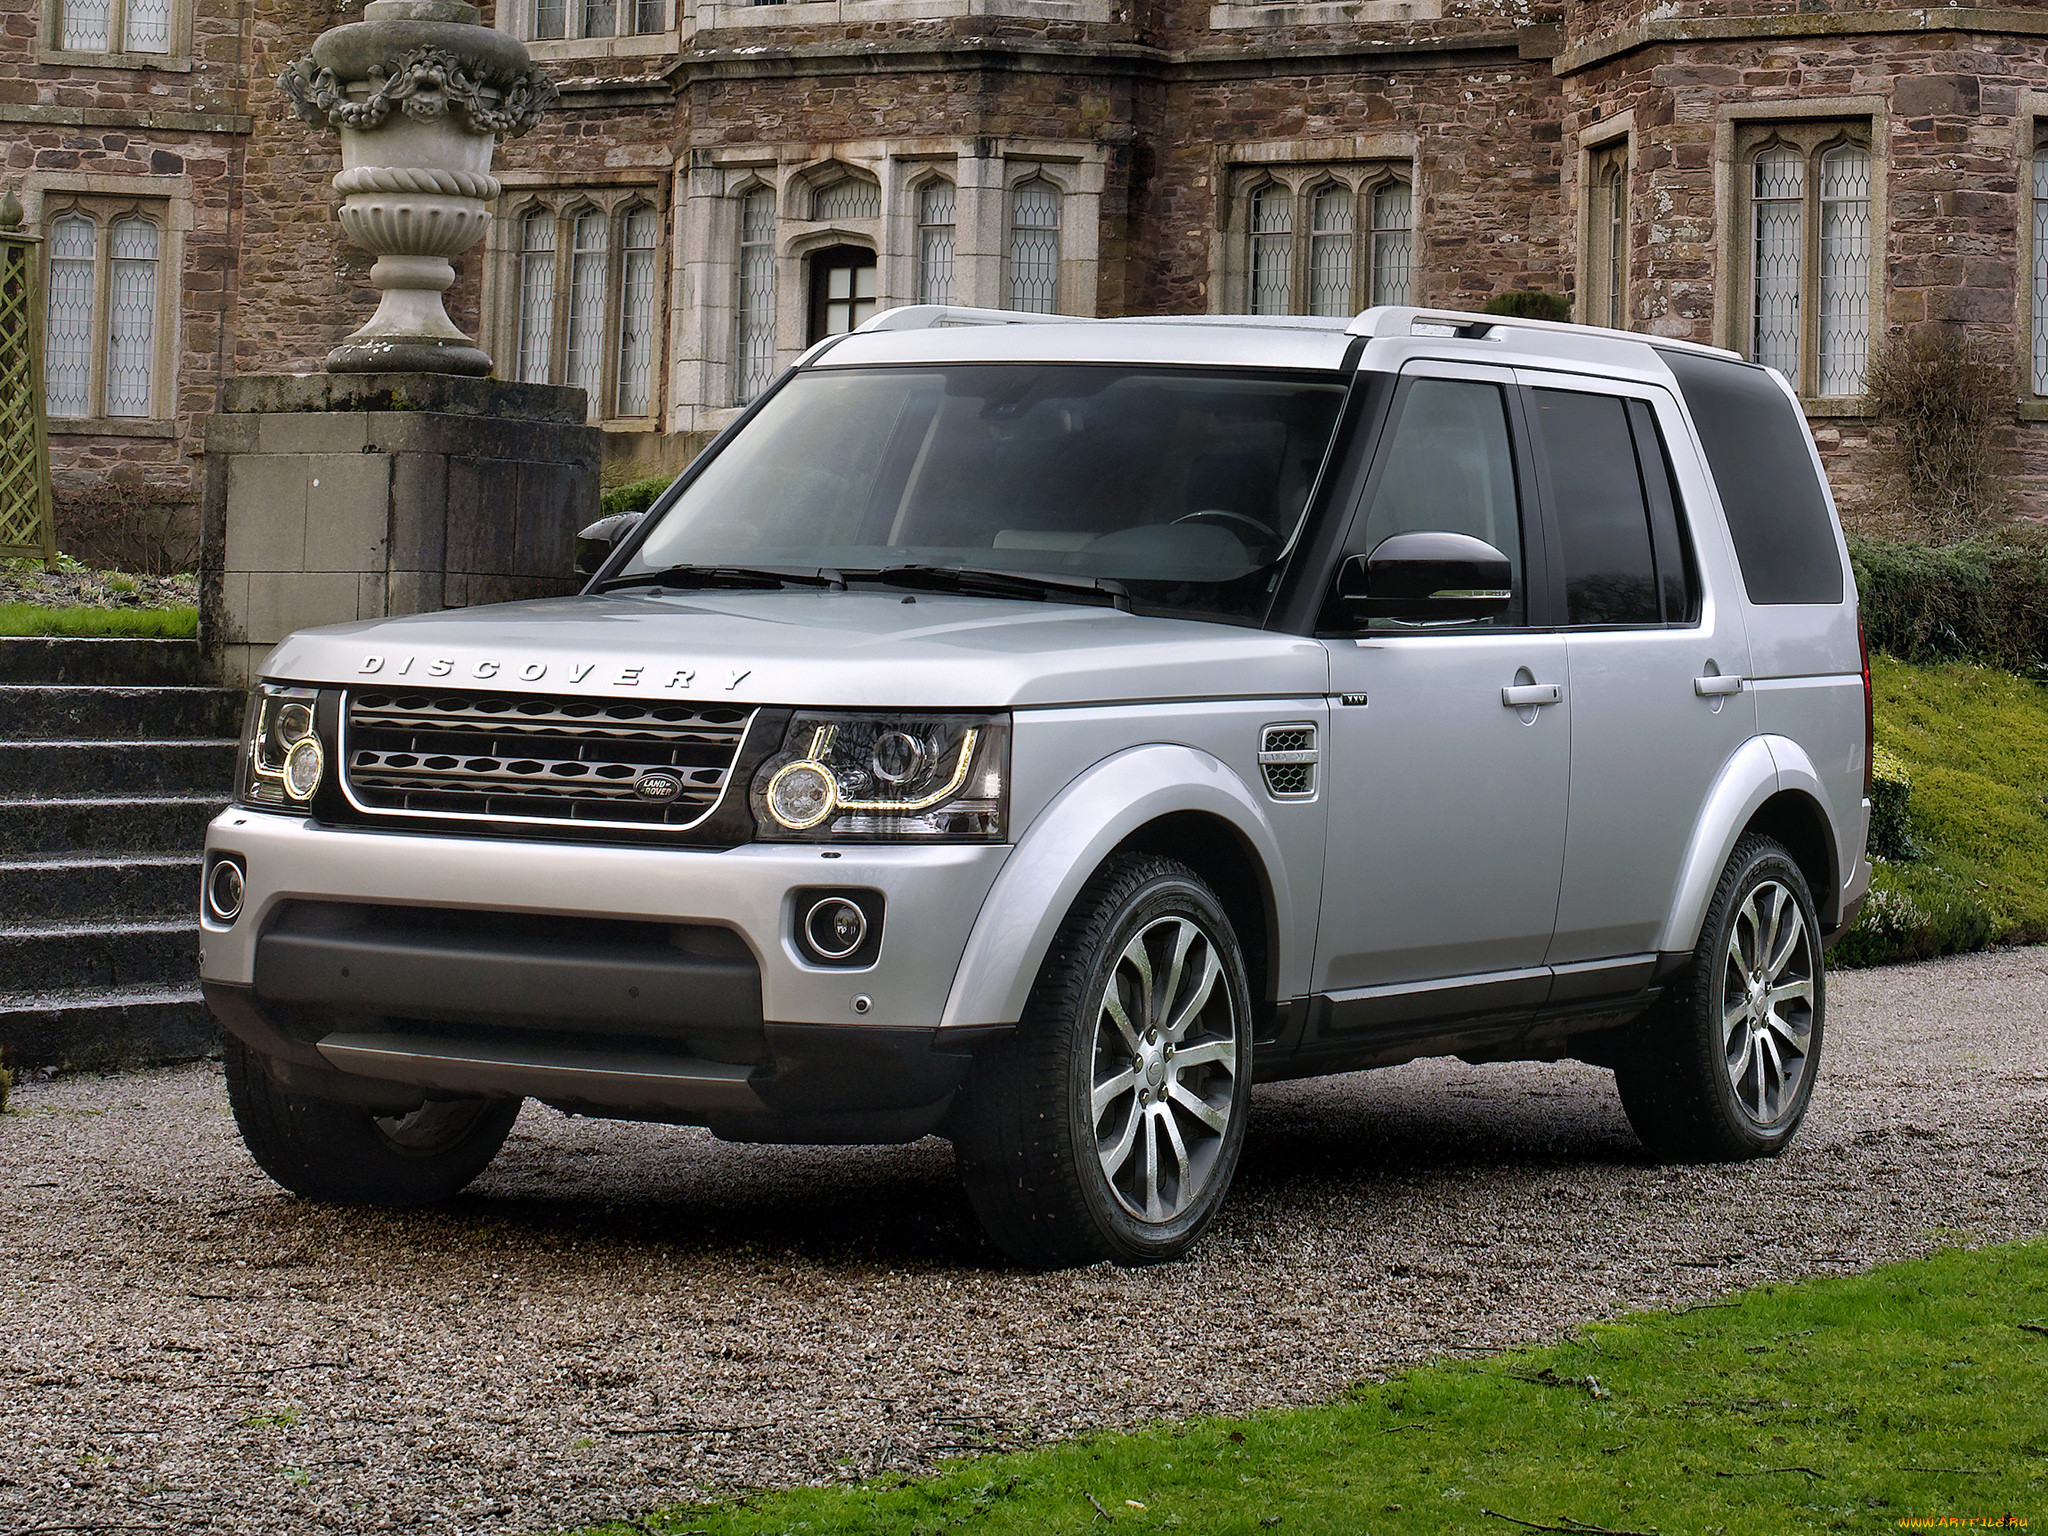 , land-rover, land, rover, discovery, 4, xxv, special, edition, 2014